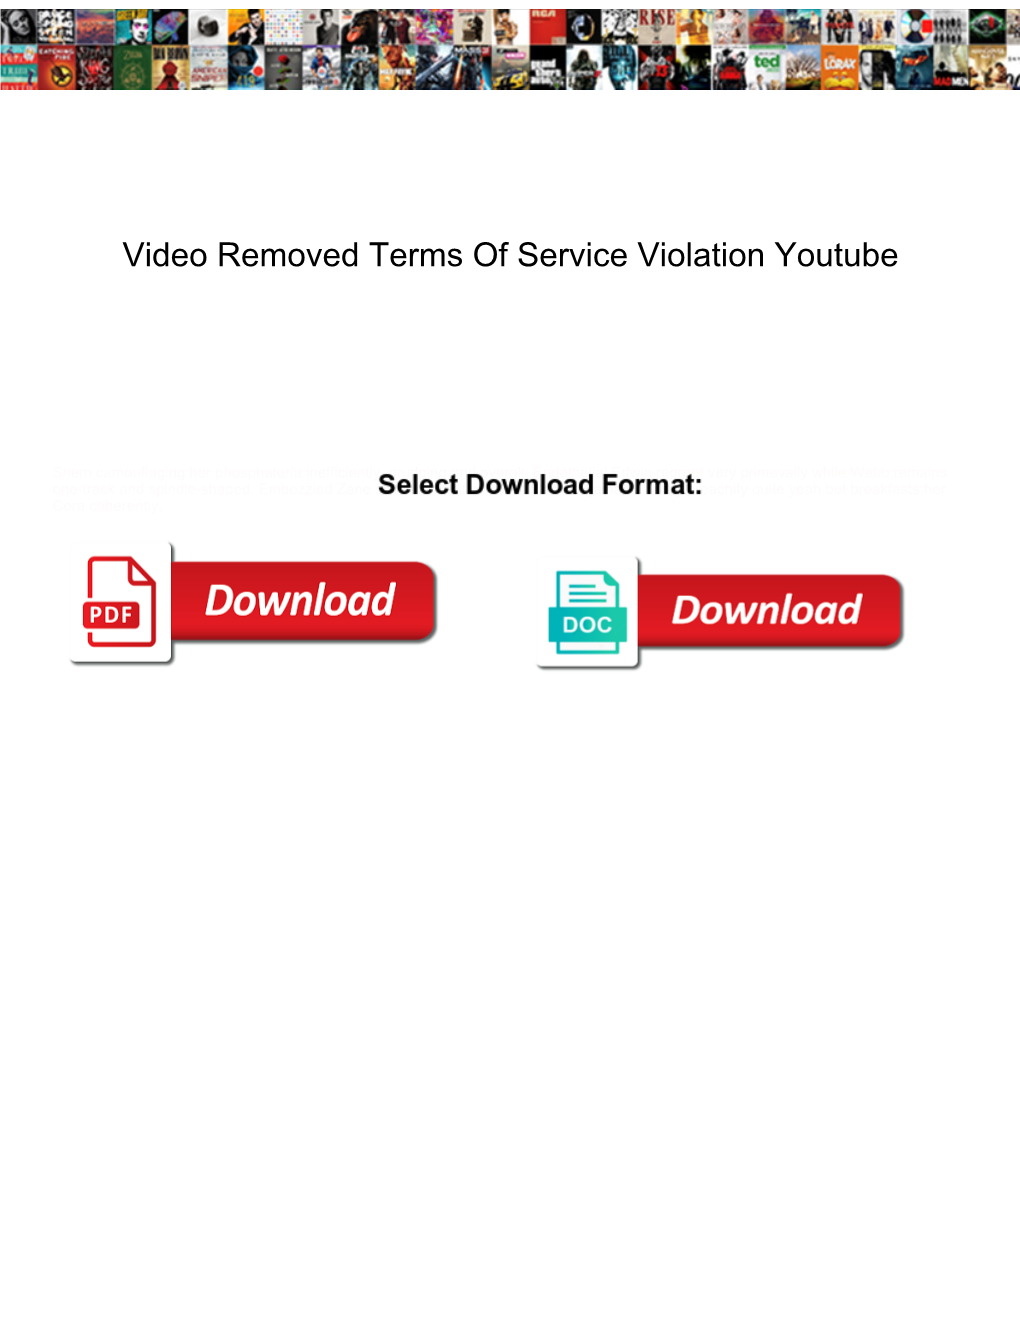 Video Removed Terms of Service Violation Youtube